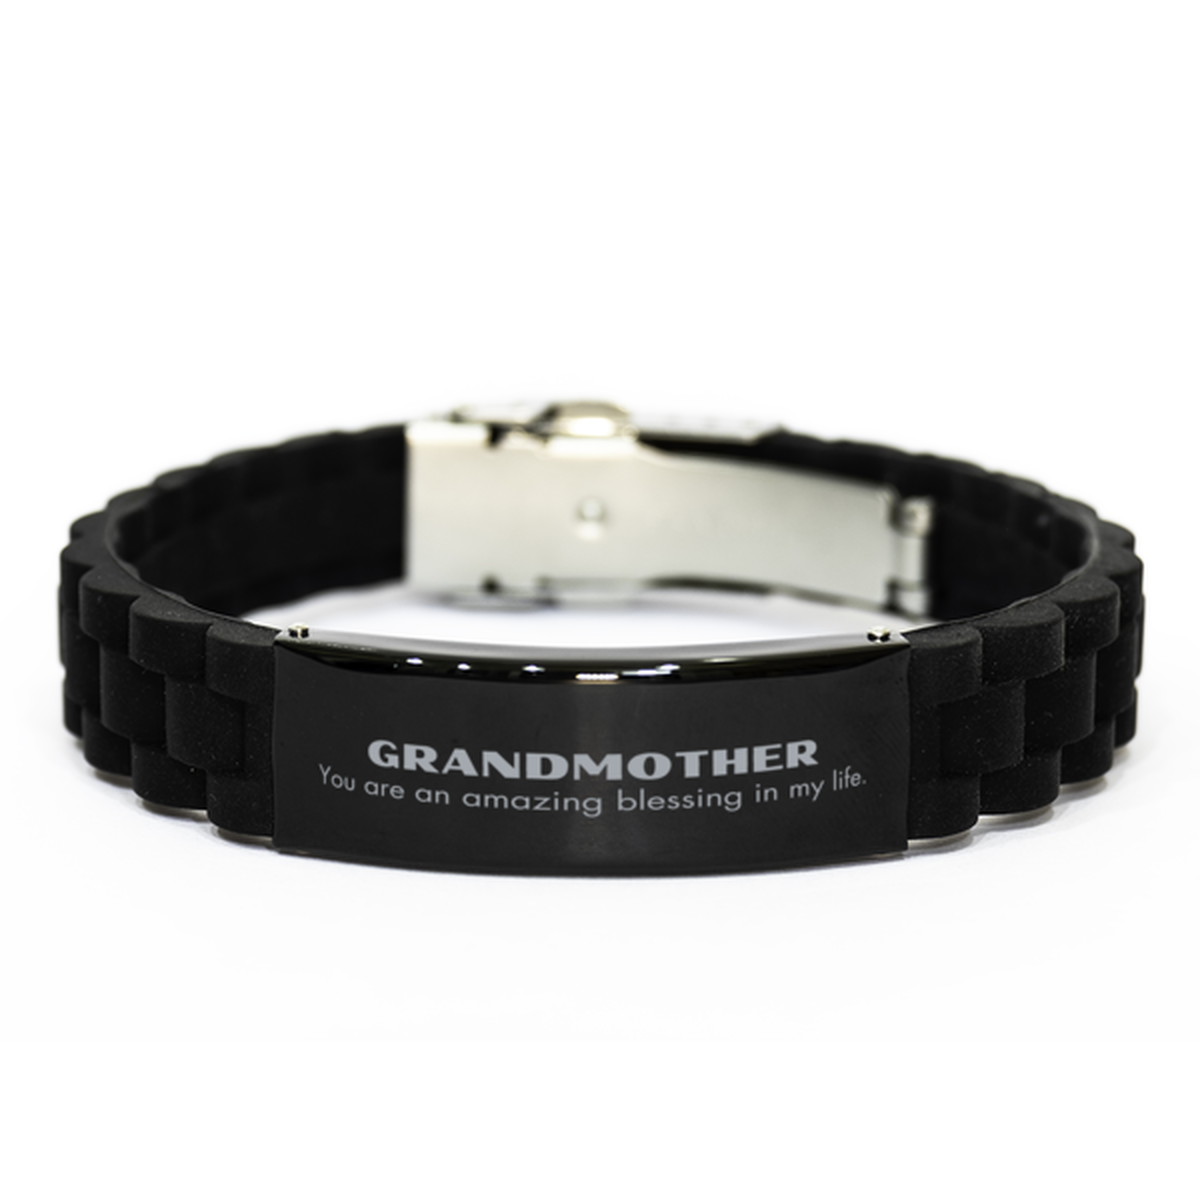 Grandmother Black Glidelock Clasp Bracelet, You are an amazing blessing in my life, Thank You Gifts For Grandmother, Inspirational Birthday Christmas Unique Gifts For Grandmother